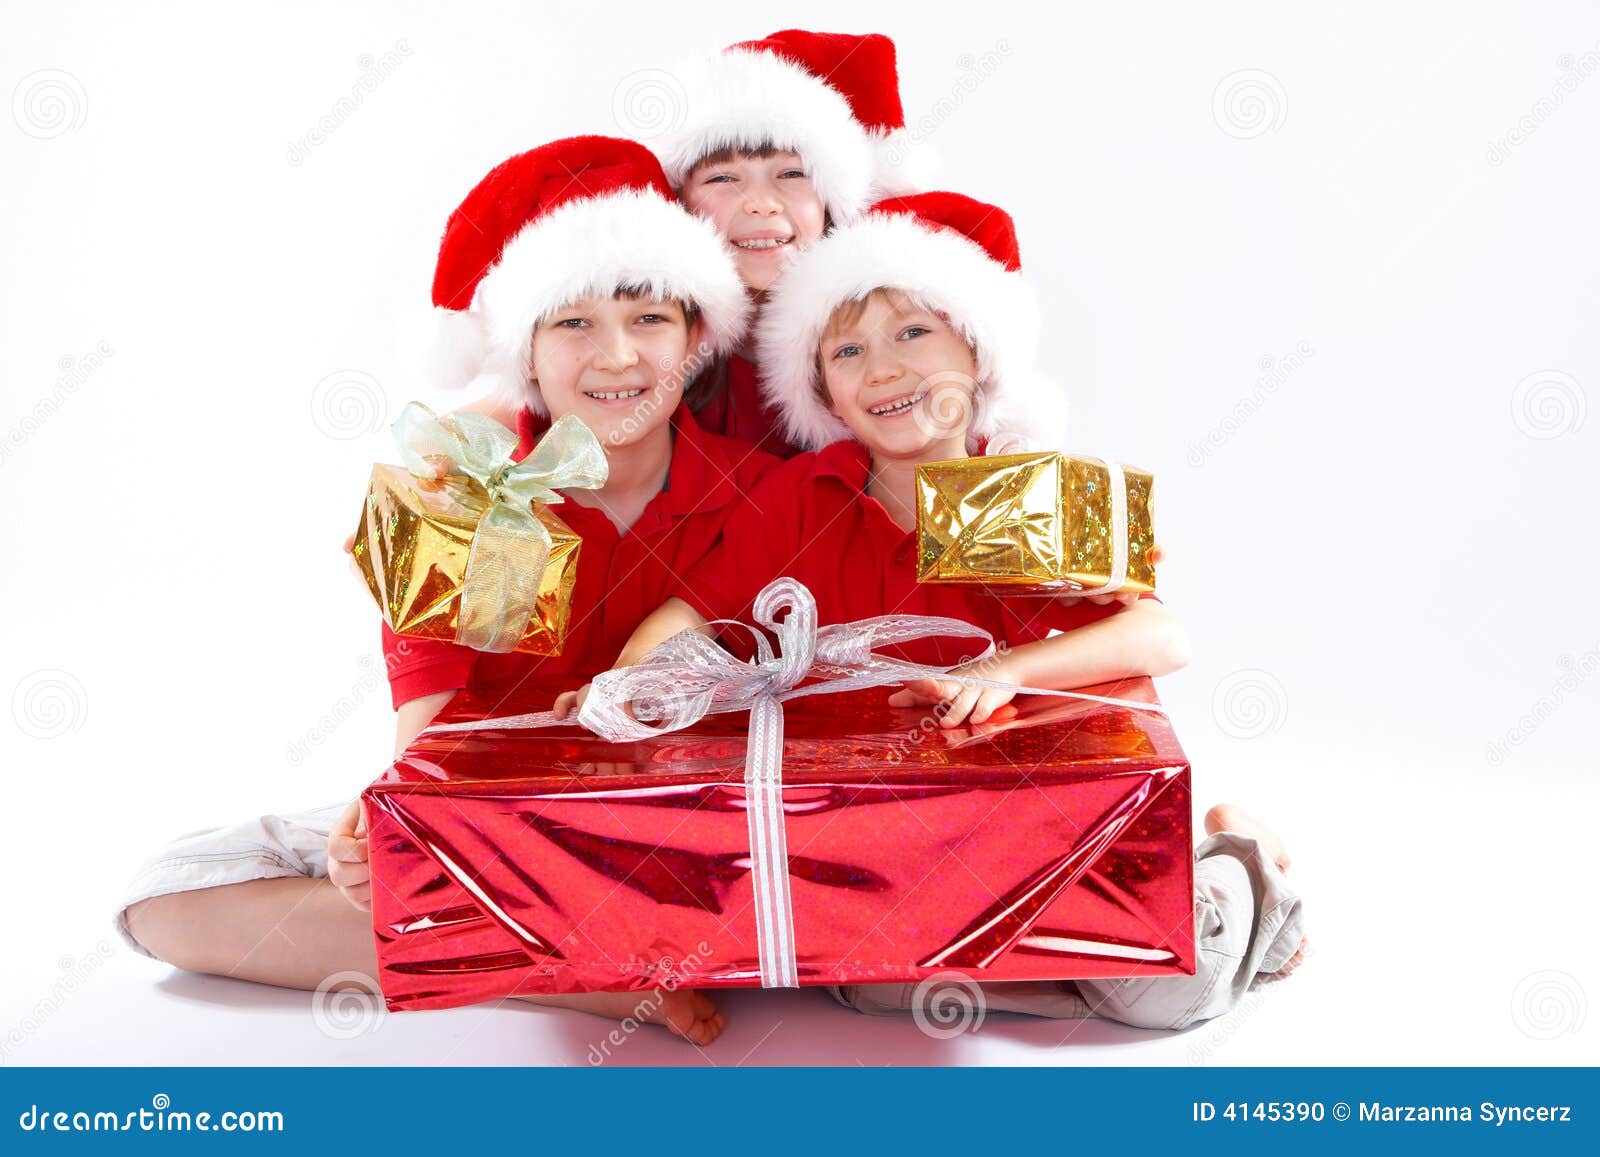 Christmas Togetherness stock photo. Image of gifts, child - 4145390